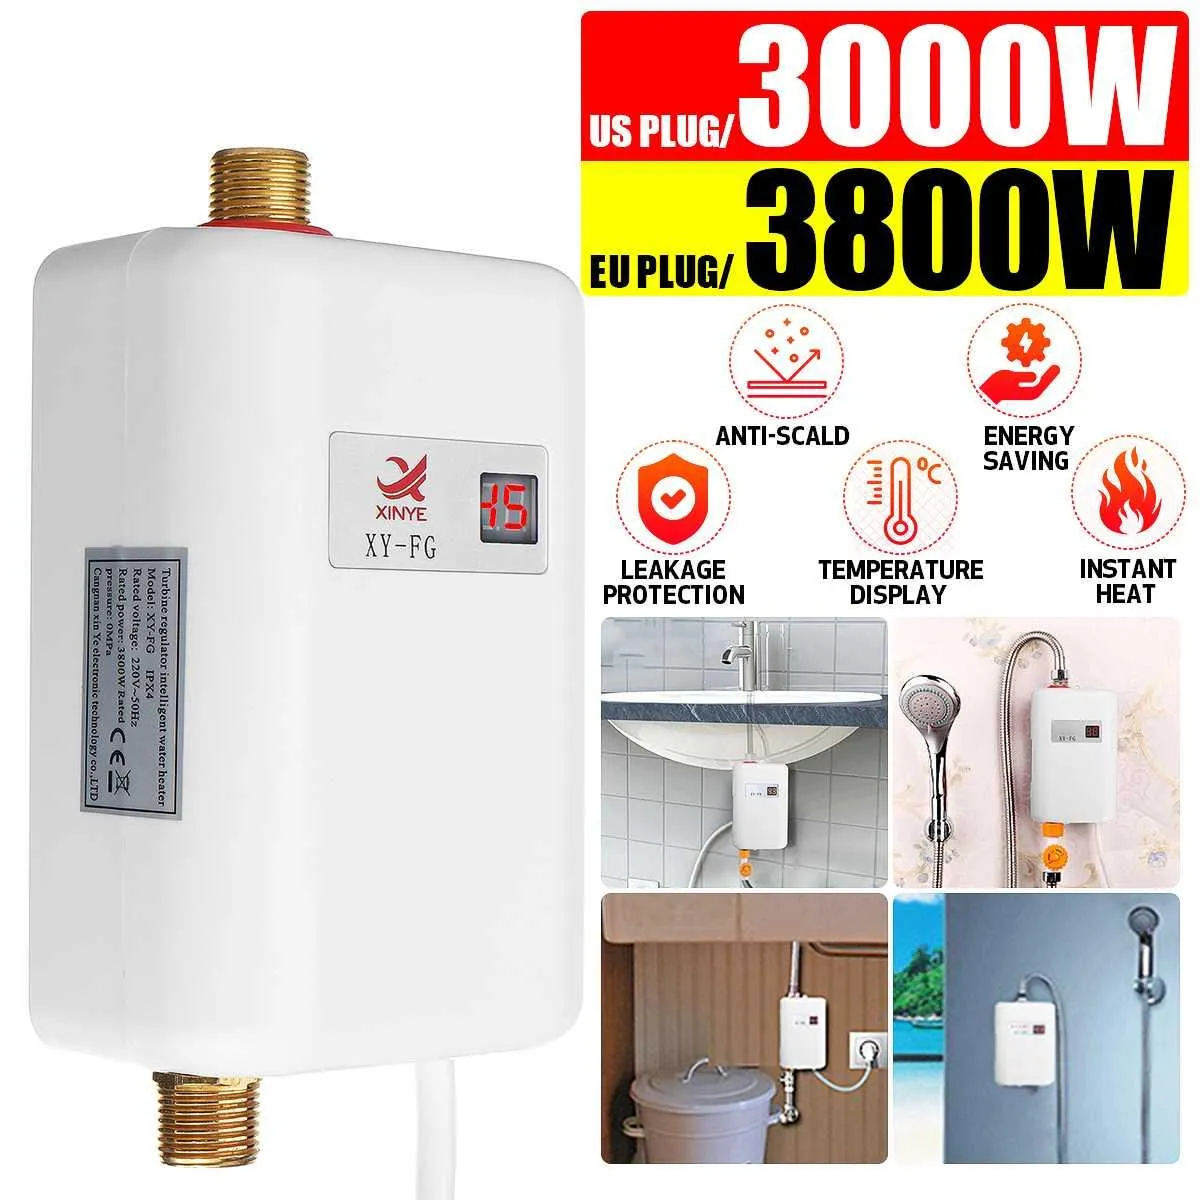 Heaters 3800W Tankless Electric Water Heater Bathroom Kitchen Instant Water Heater Faucet Temperature display Heating Shower 220V/110V